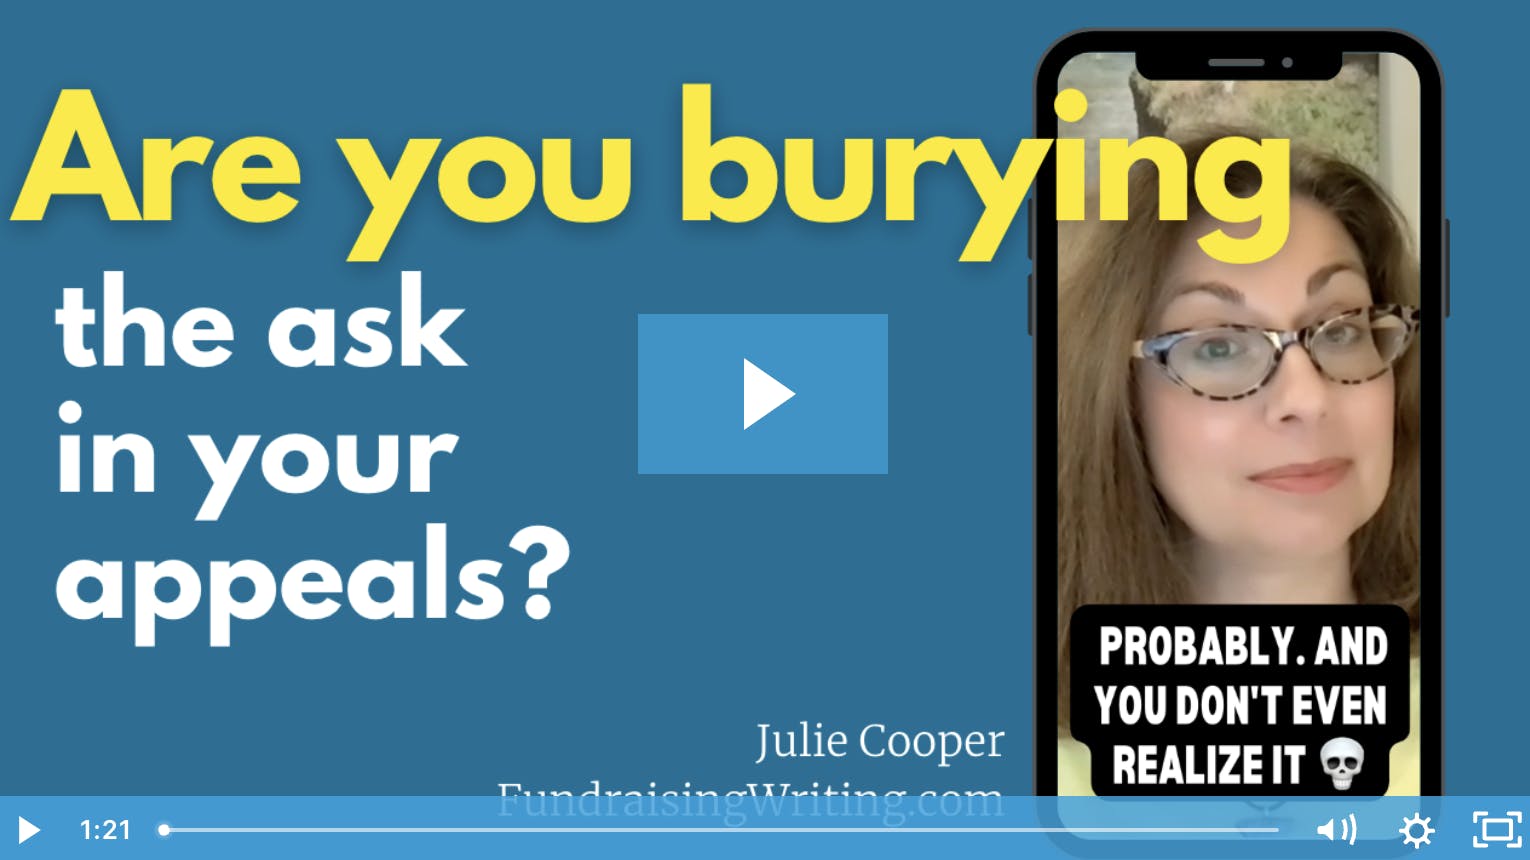 image of Julie Cooper with a video caption: "Are you burying the ask in your appeals?"